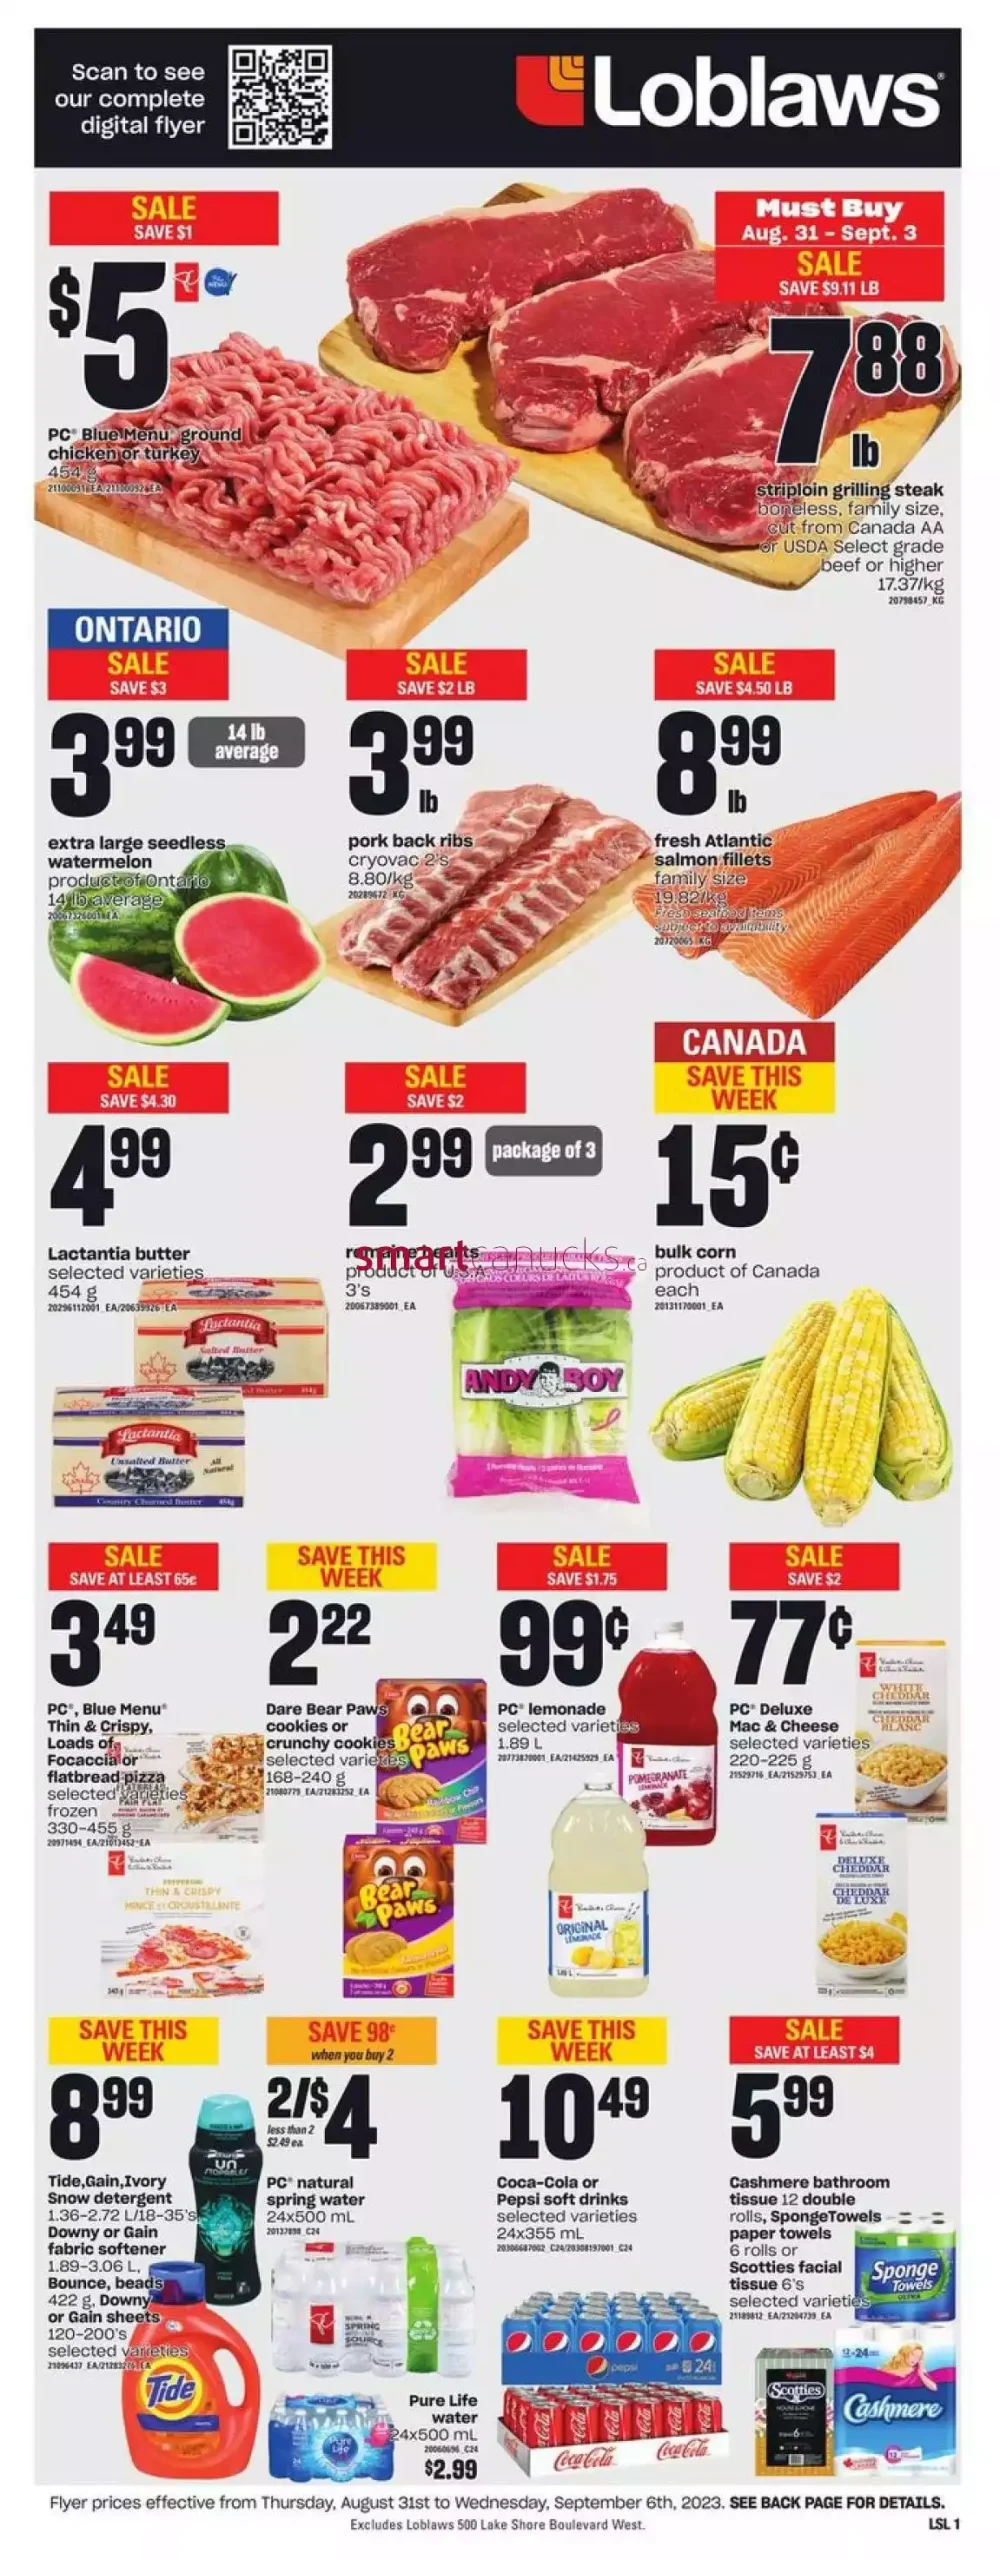 Loblaws Flyer September 28 - October 4, 2023 Preview (ON) 2